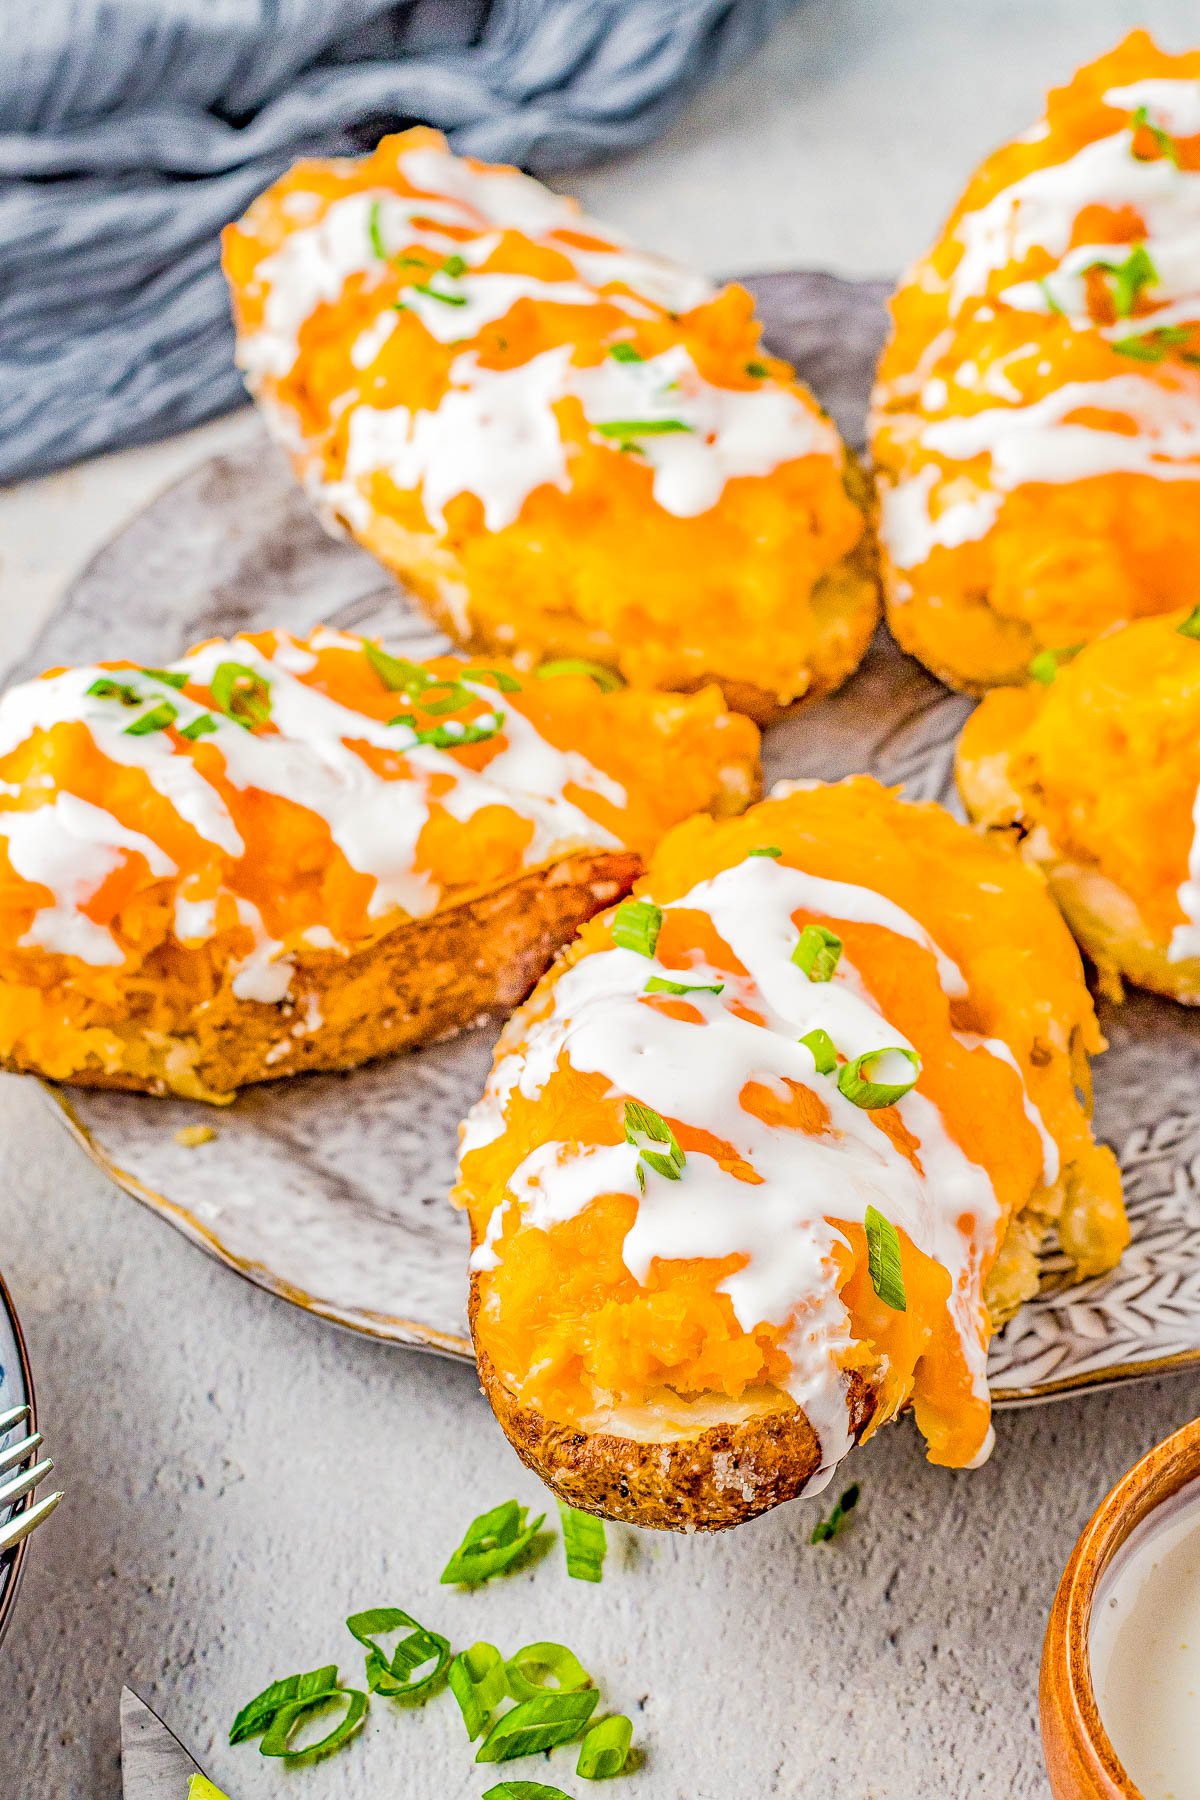 Buffalo Chicken Stuffed Potatoes – If you love the tang and heat of buffalo chicken wings, then you're going to love these EASY stuffed potatoes! Chock full of shredded buffalo chicken, cheddar and mozzarella cheeses, cream cheese, and sour cream, I promise these are a COMFORT FOOD delight! Whether you make them as a main dish for a weeknight dinner, as a party appetizer, or as a game day snack, everyone LOVES them! 